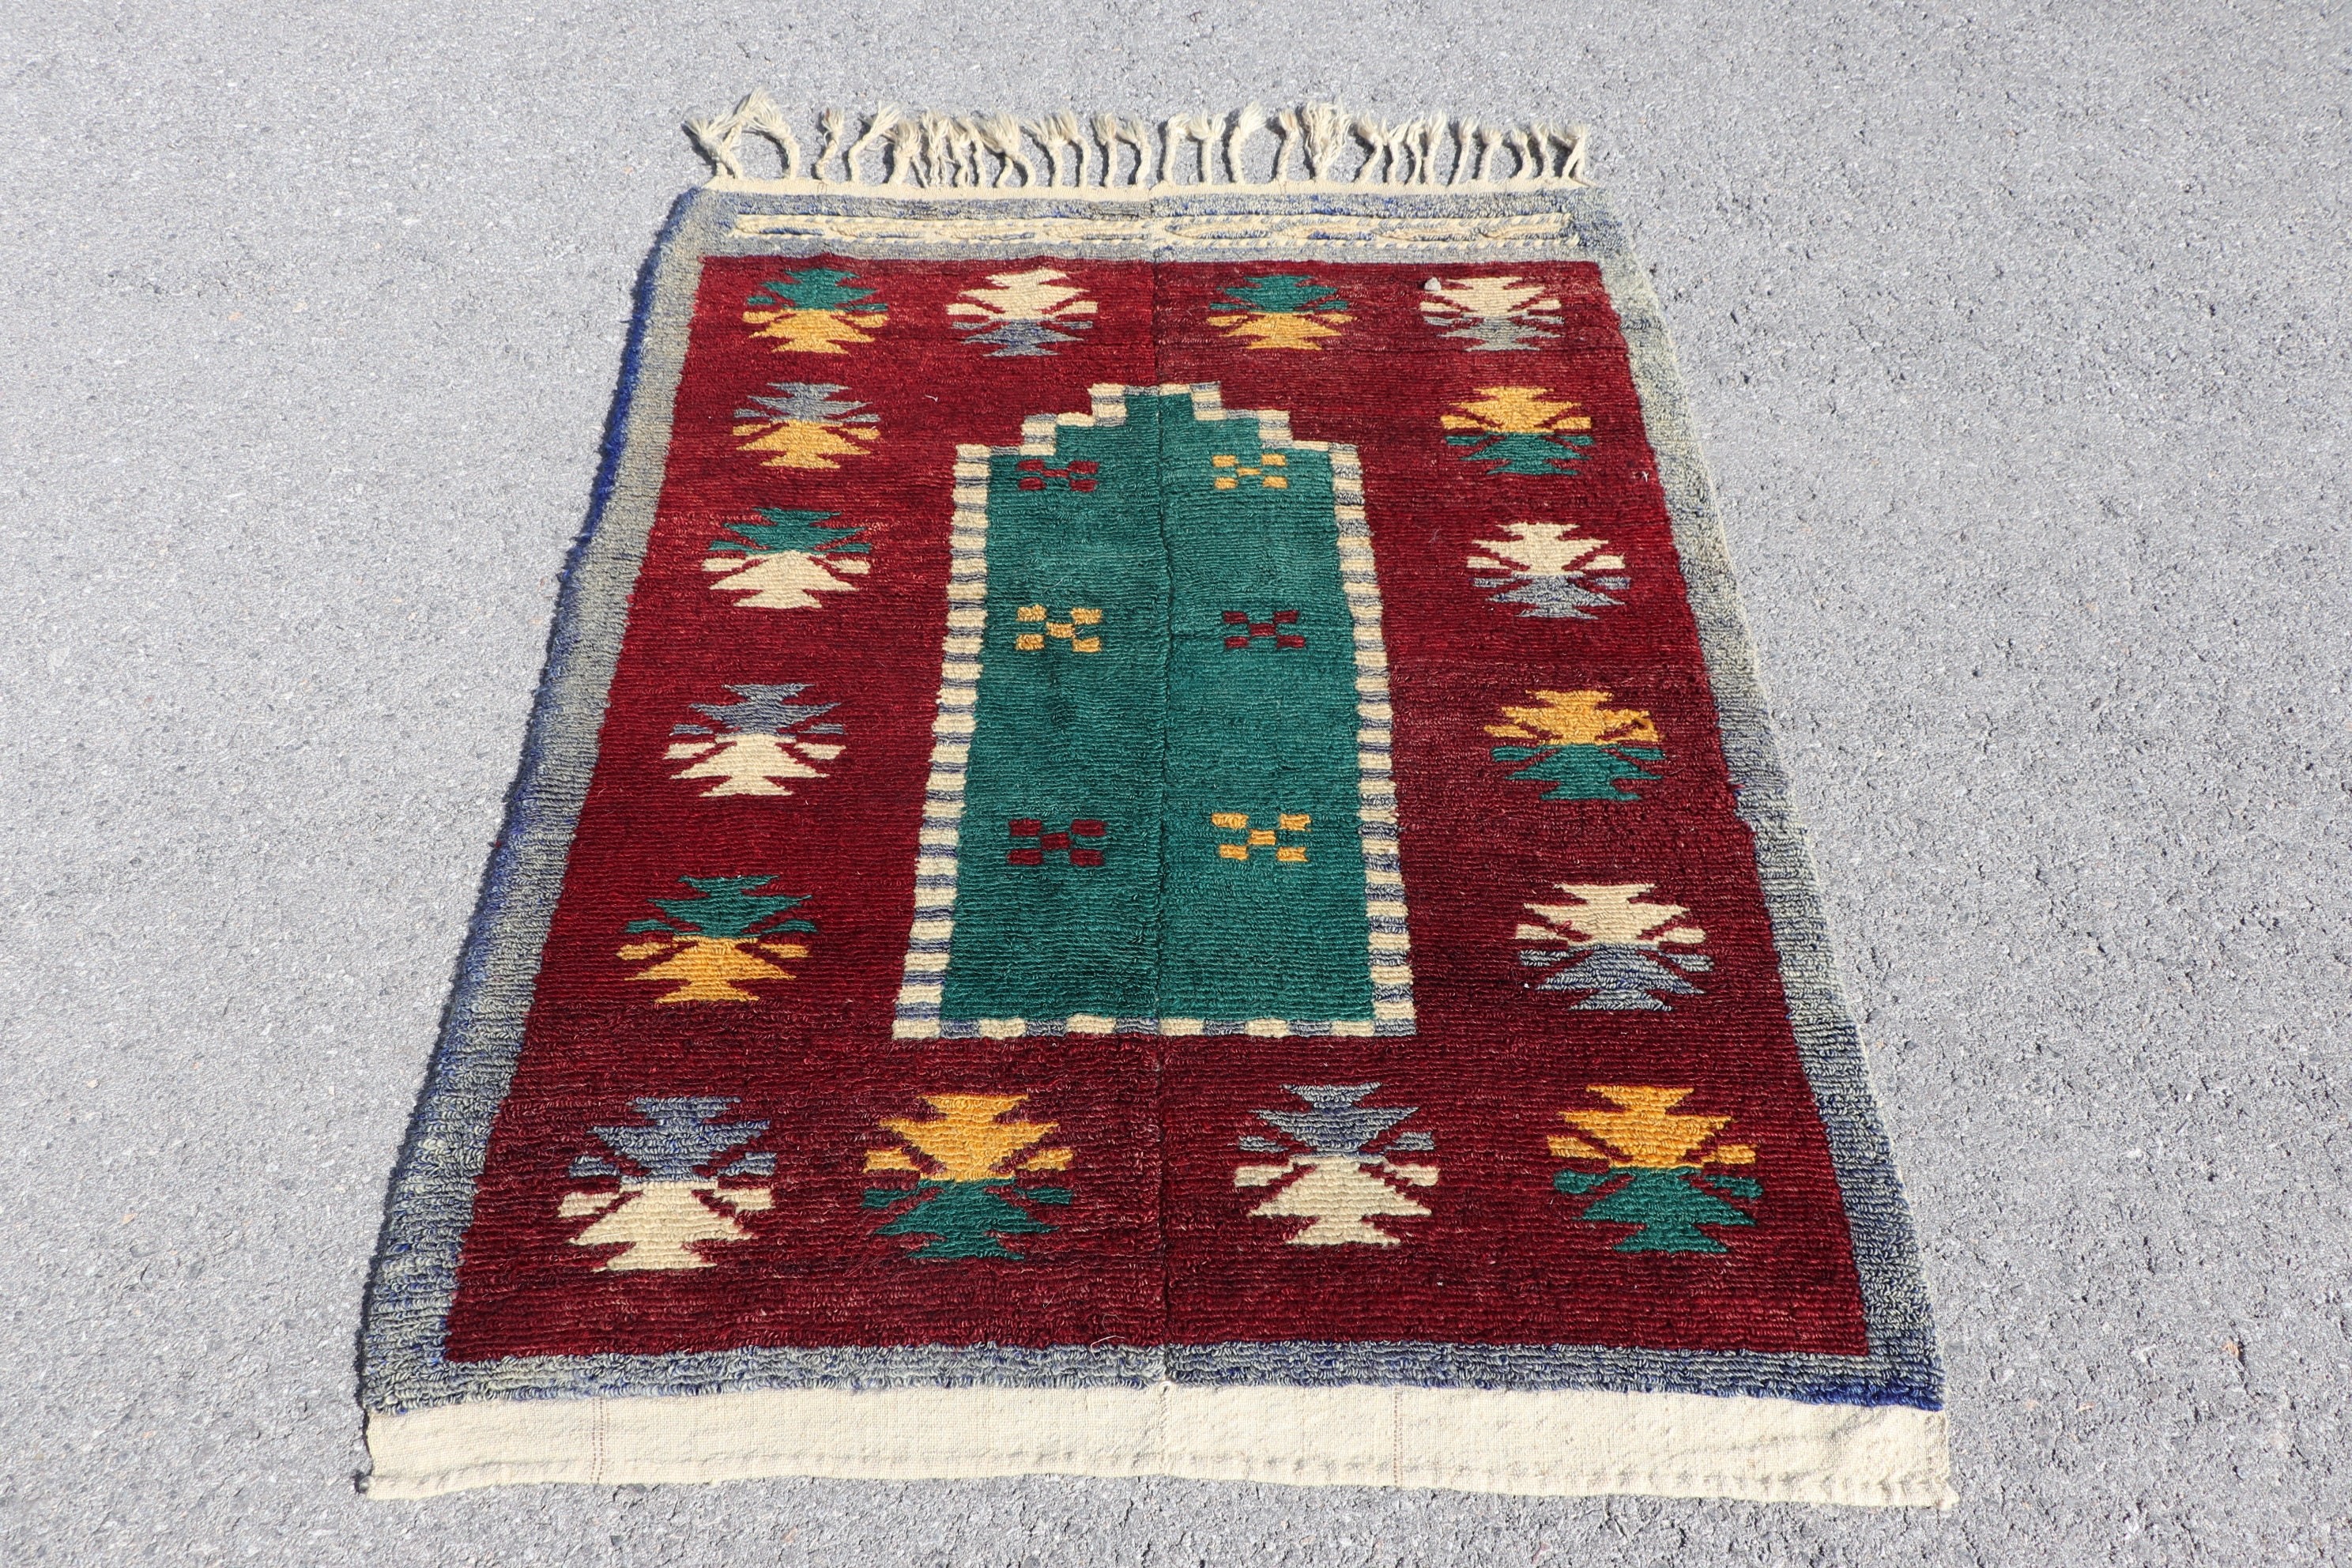 Red Floor Rugs, Kitchen Rug, Rugs for Entry, Muted Rug, 3.6x4.8 ft Accent Rug, Cool Rug, Entry Rugs, Vintage Rug, Turkish Rug